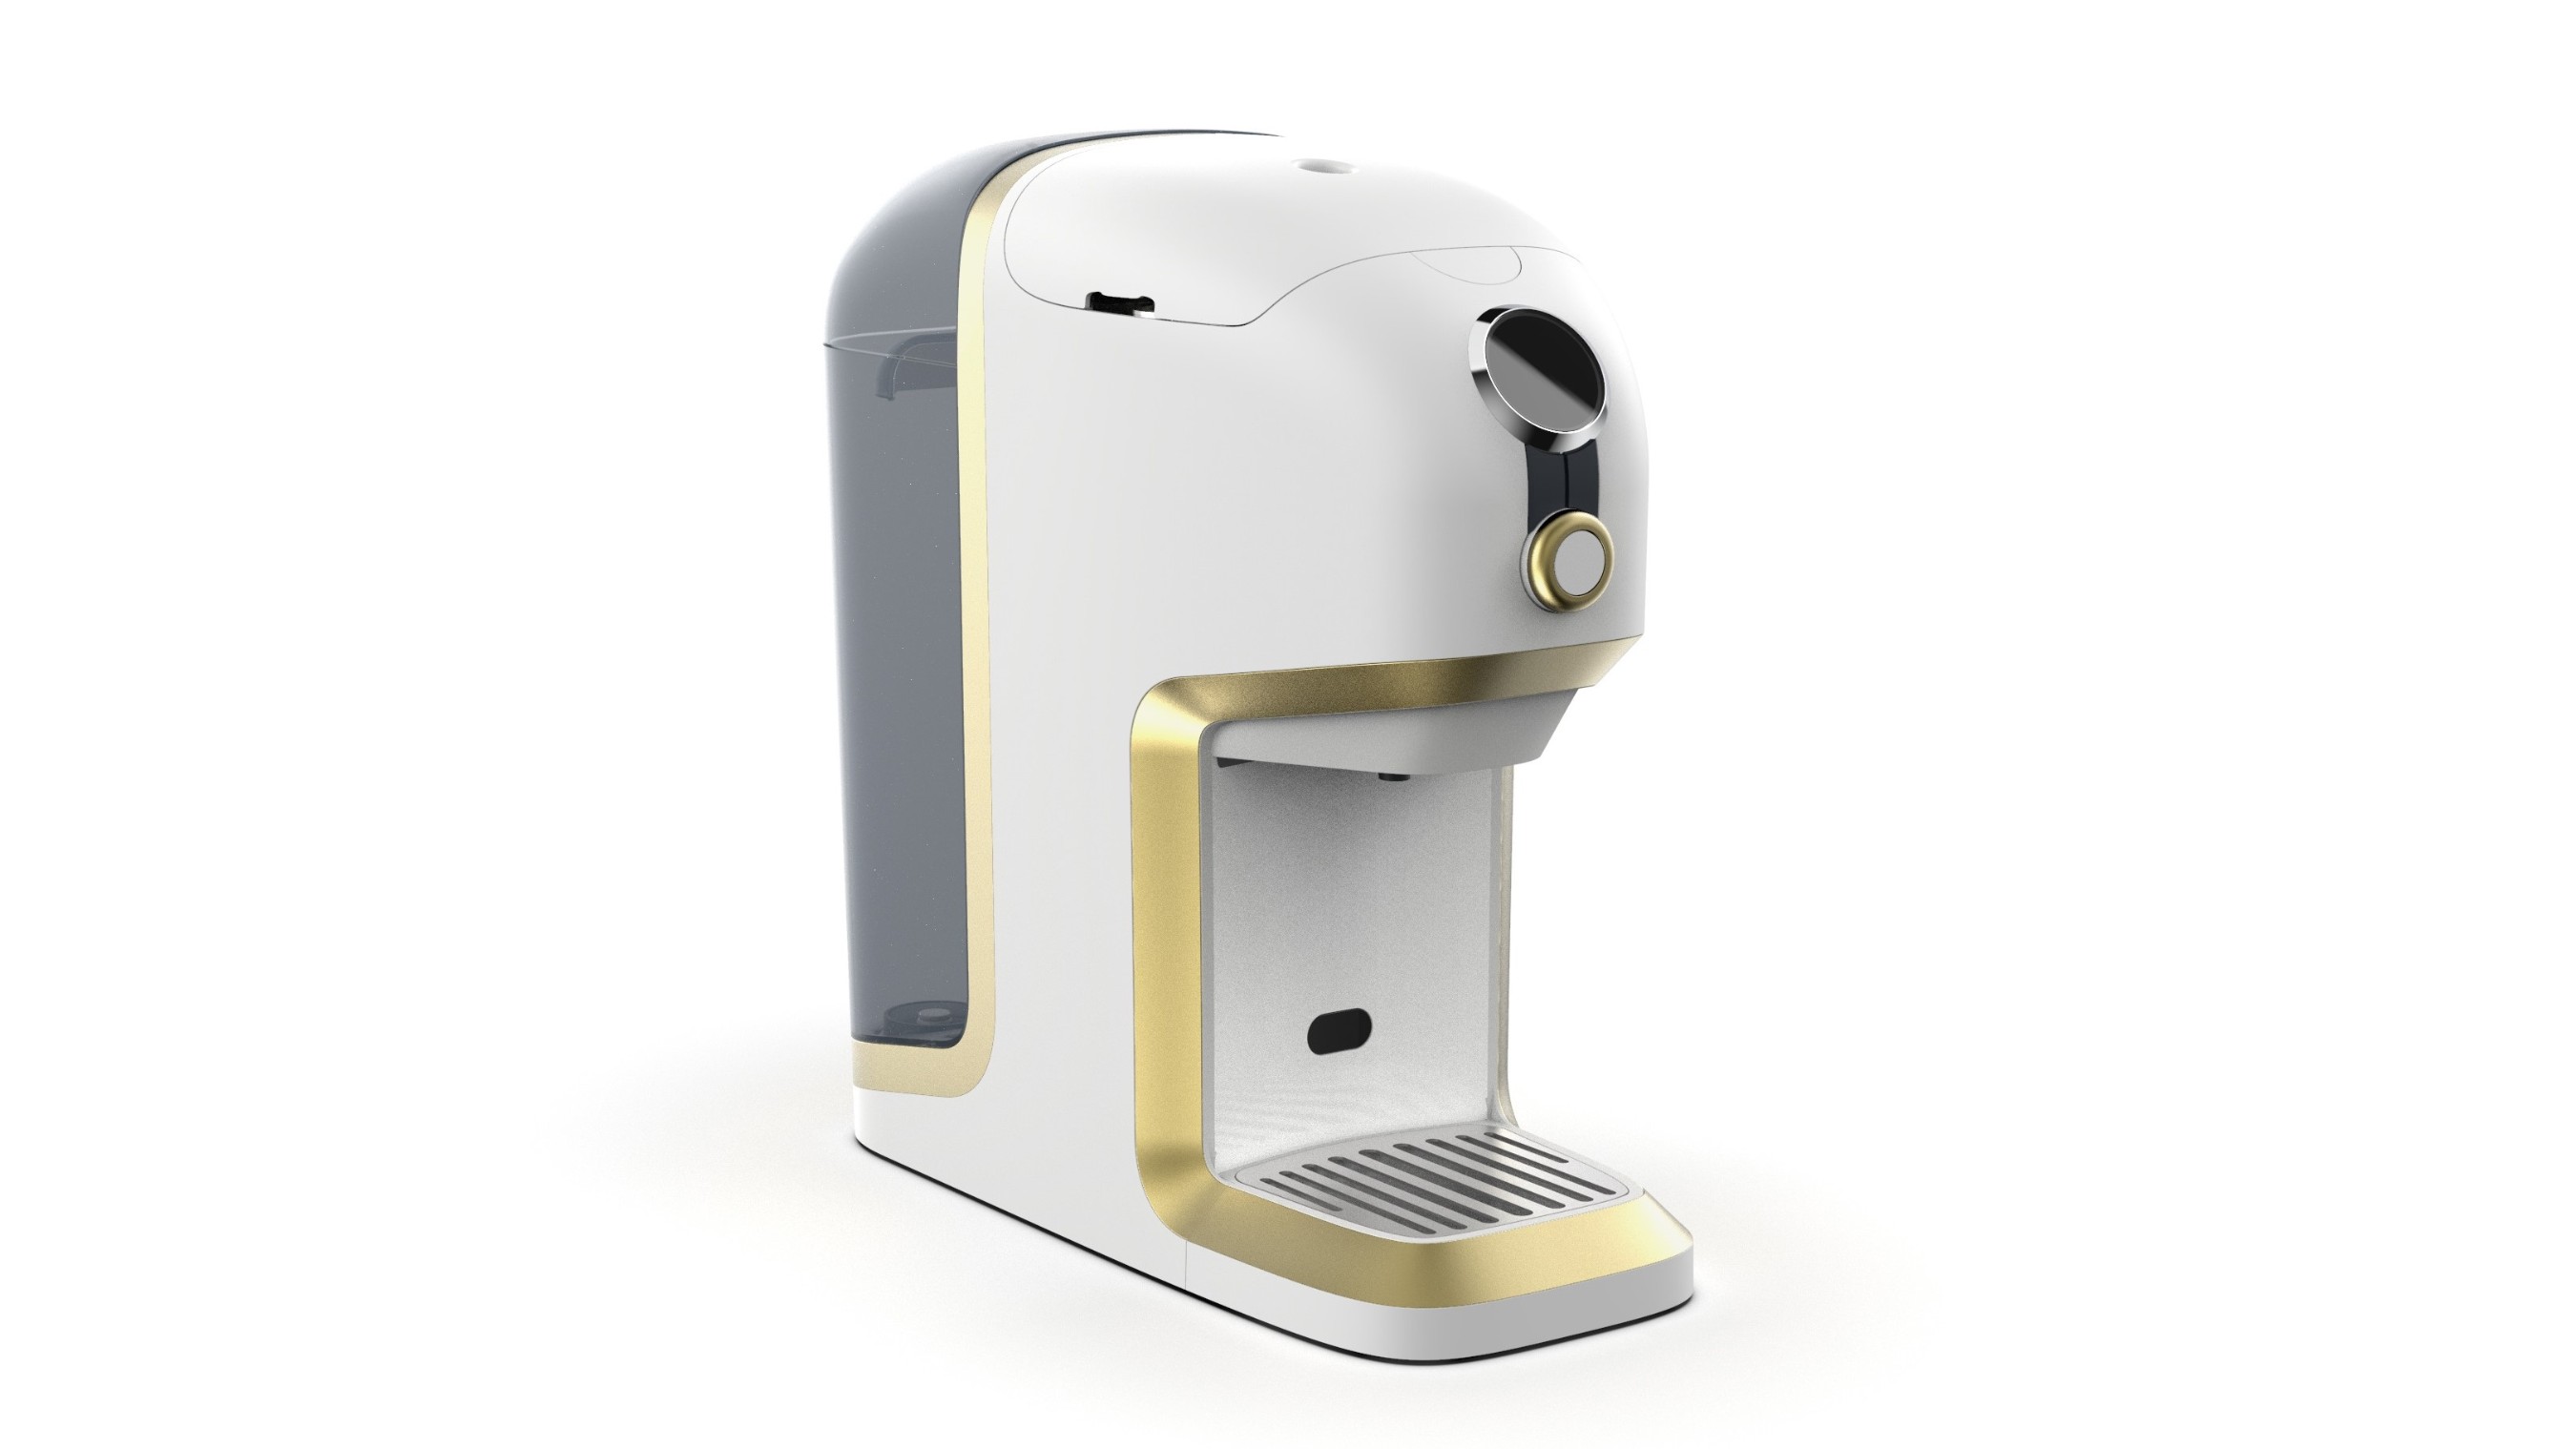 The world's first automated tea-brewer guarantees the perfect cup of tea every time.